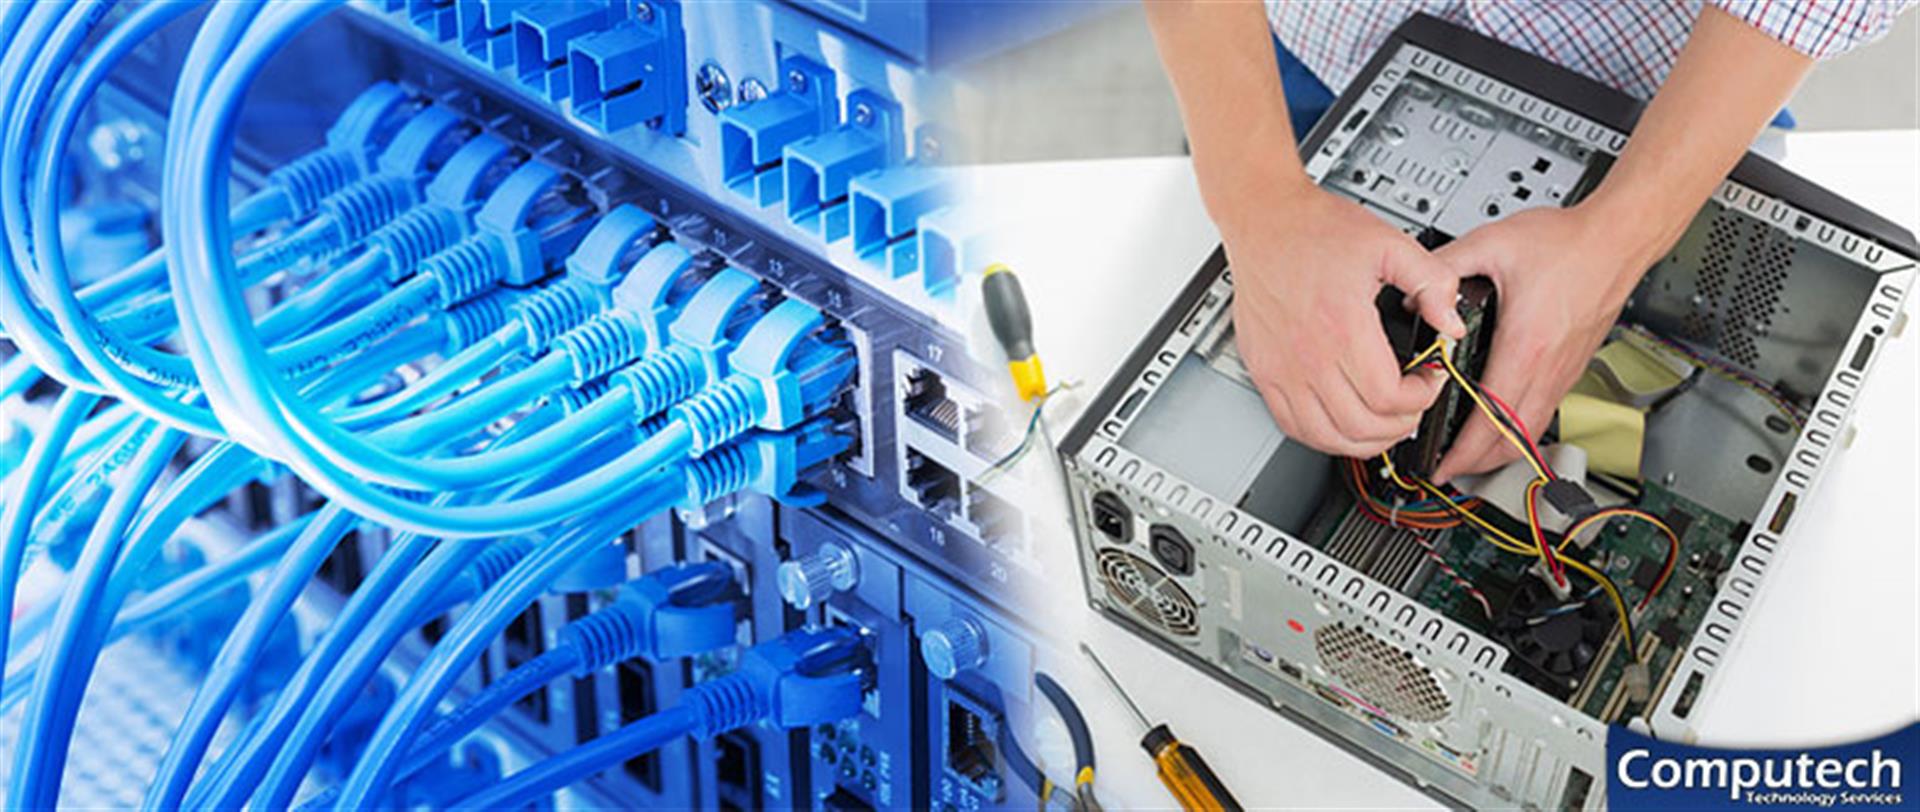 Mountain Brook Alabama Onsite PC & Printer Repairs, Networks, Telecom & Data Low Voltage Cabling Services